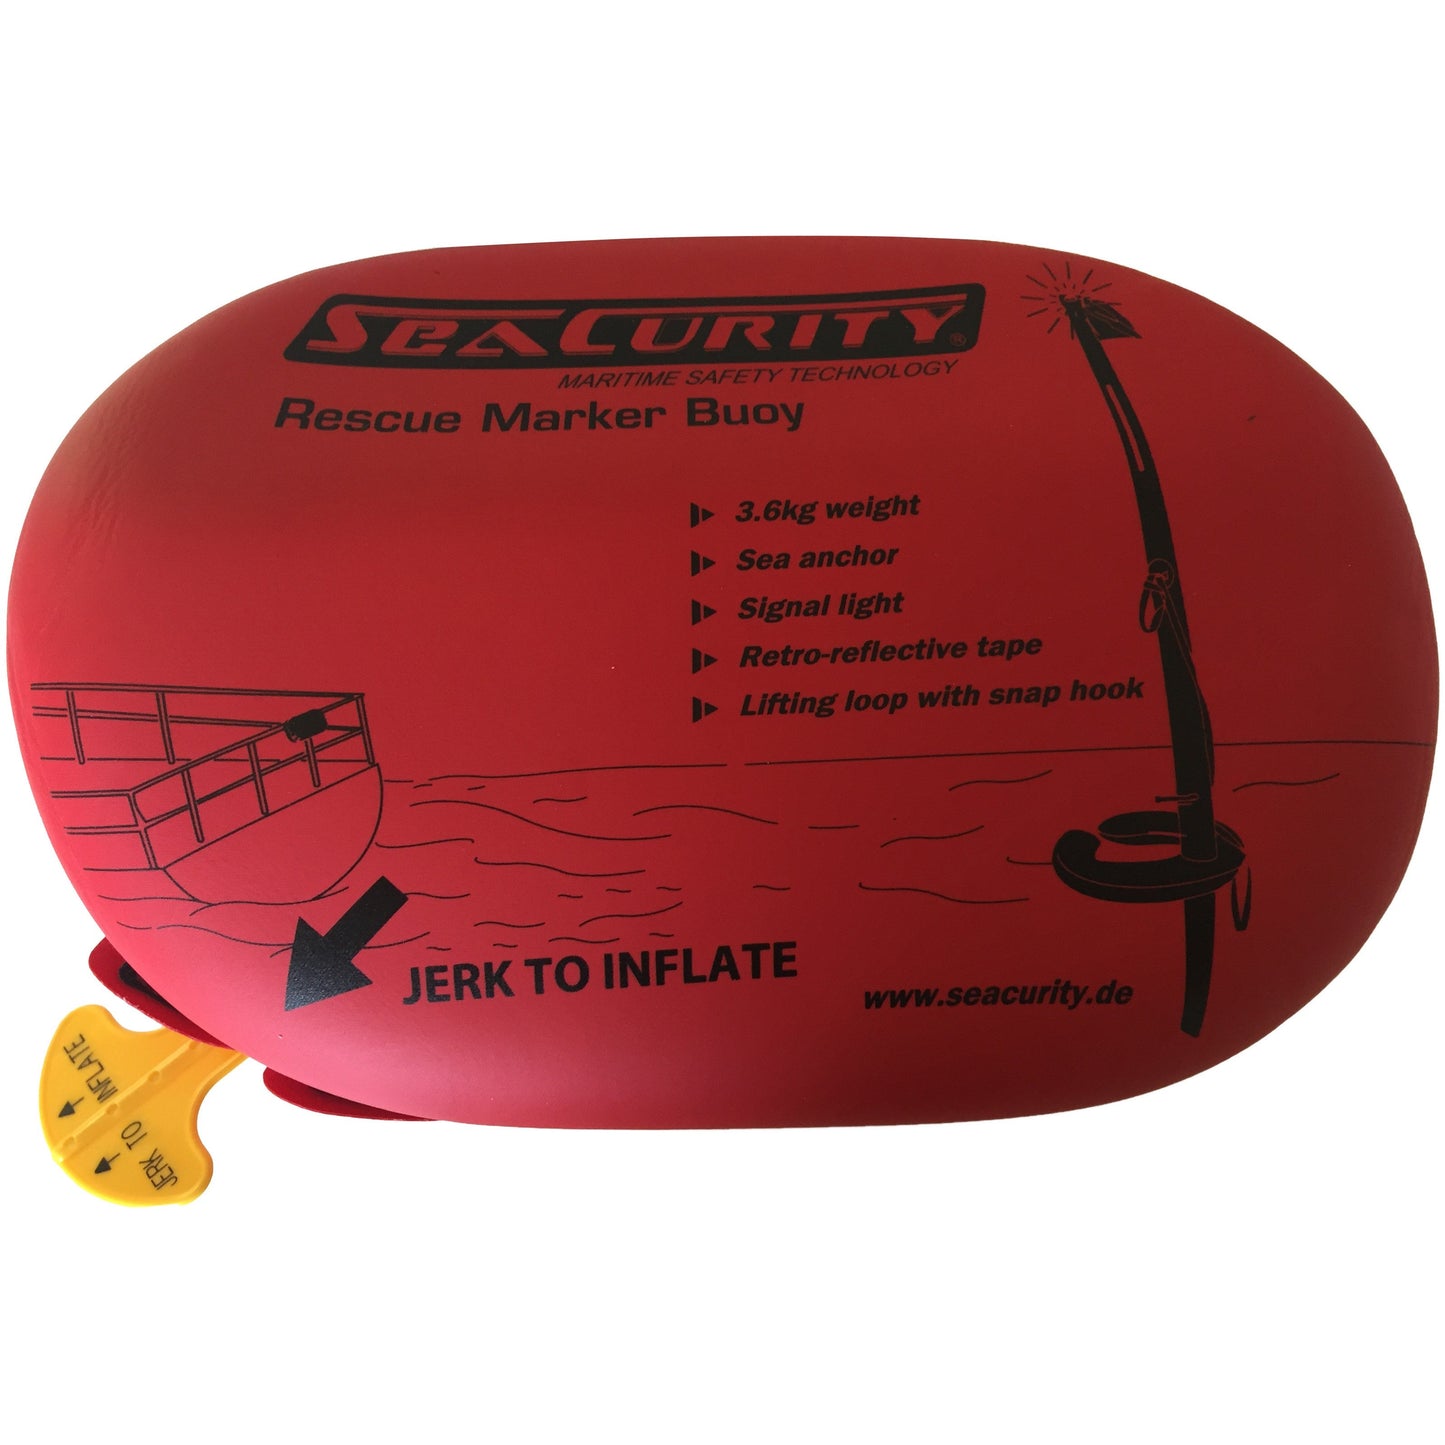 Red bag for SeaCurity Rescue Marker Buoy